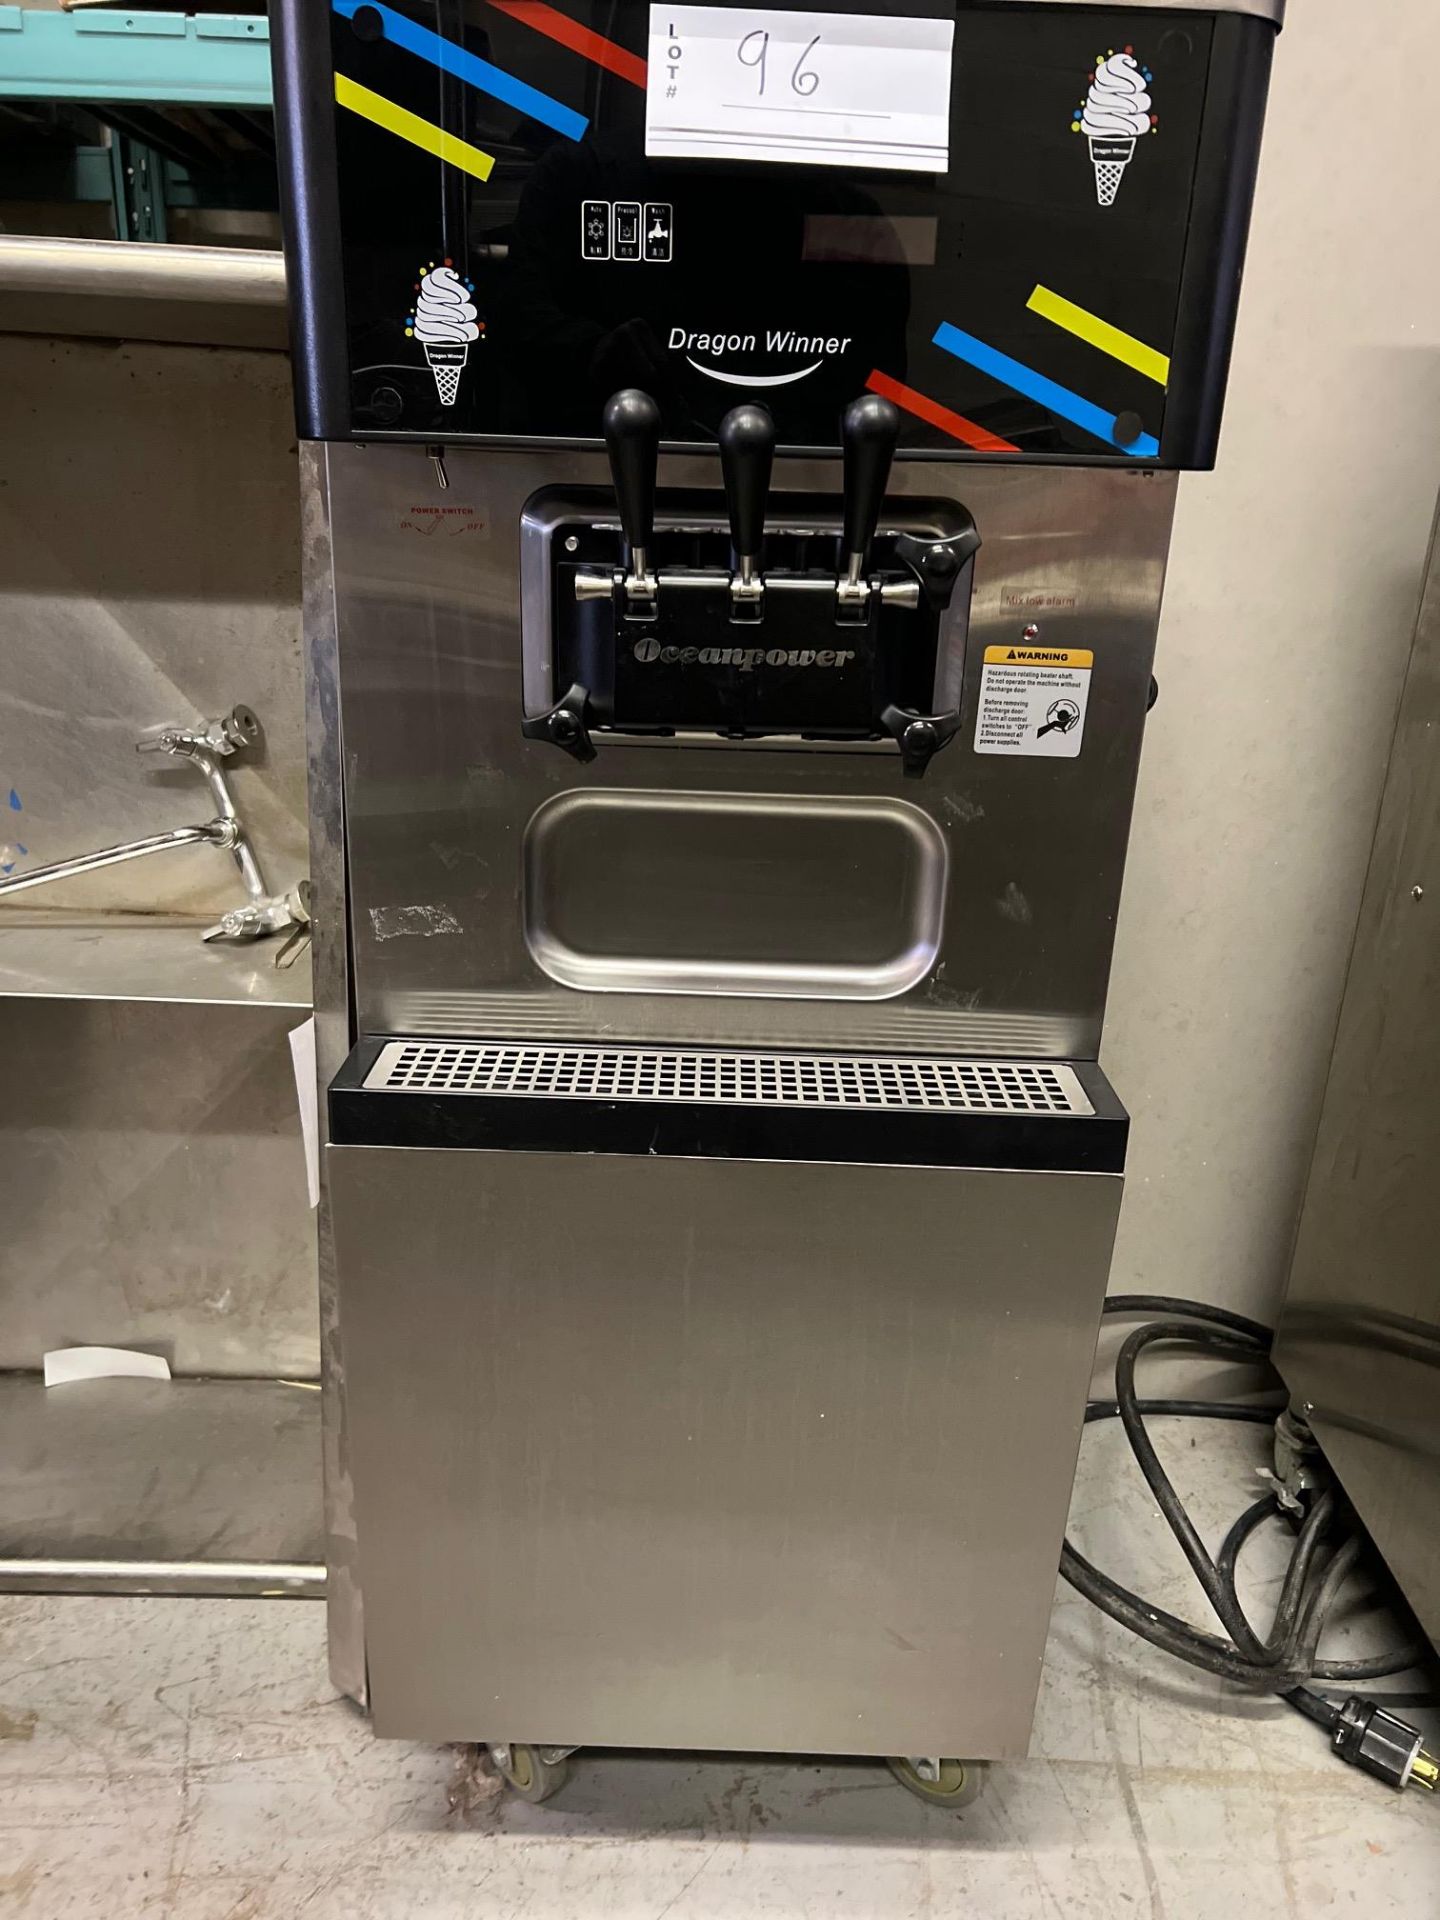 OCEANPOWER DRAGON WINNER COMMERCIAL SOT ICE CREAM MACHINE, MODEL DW138 TCP, 2018, (NOT WORKING) - Image 3 of 4